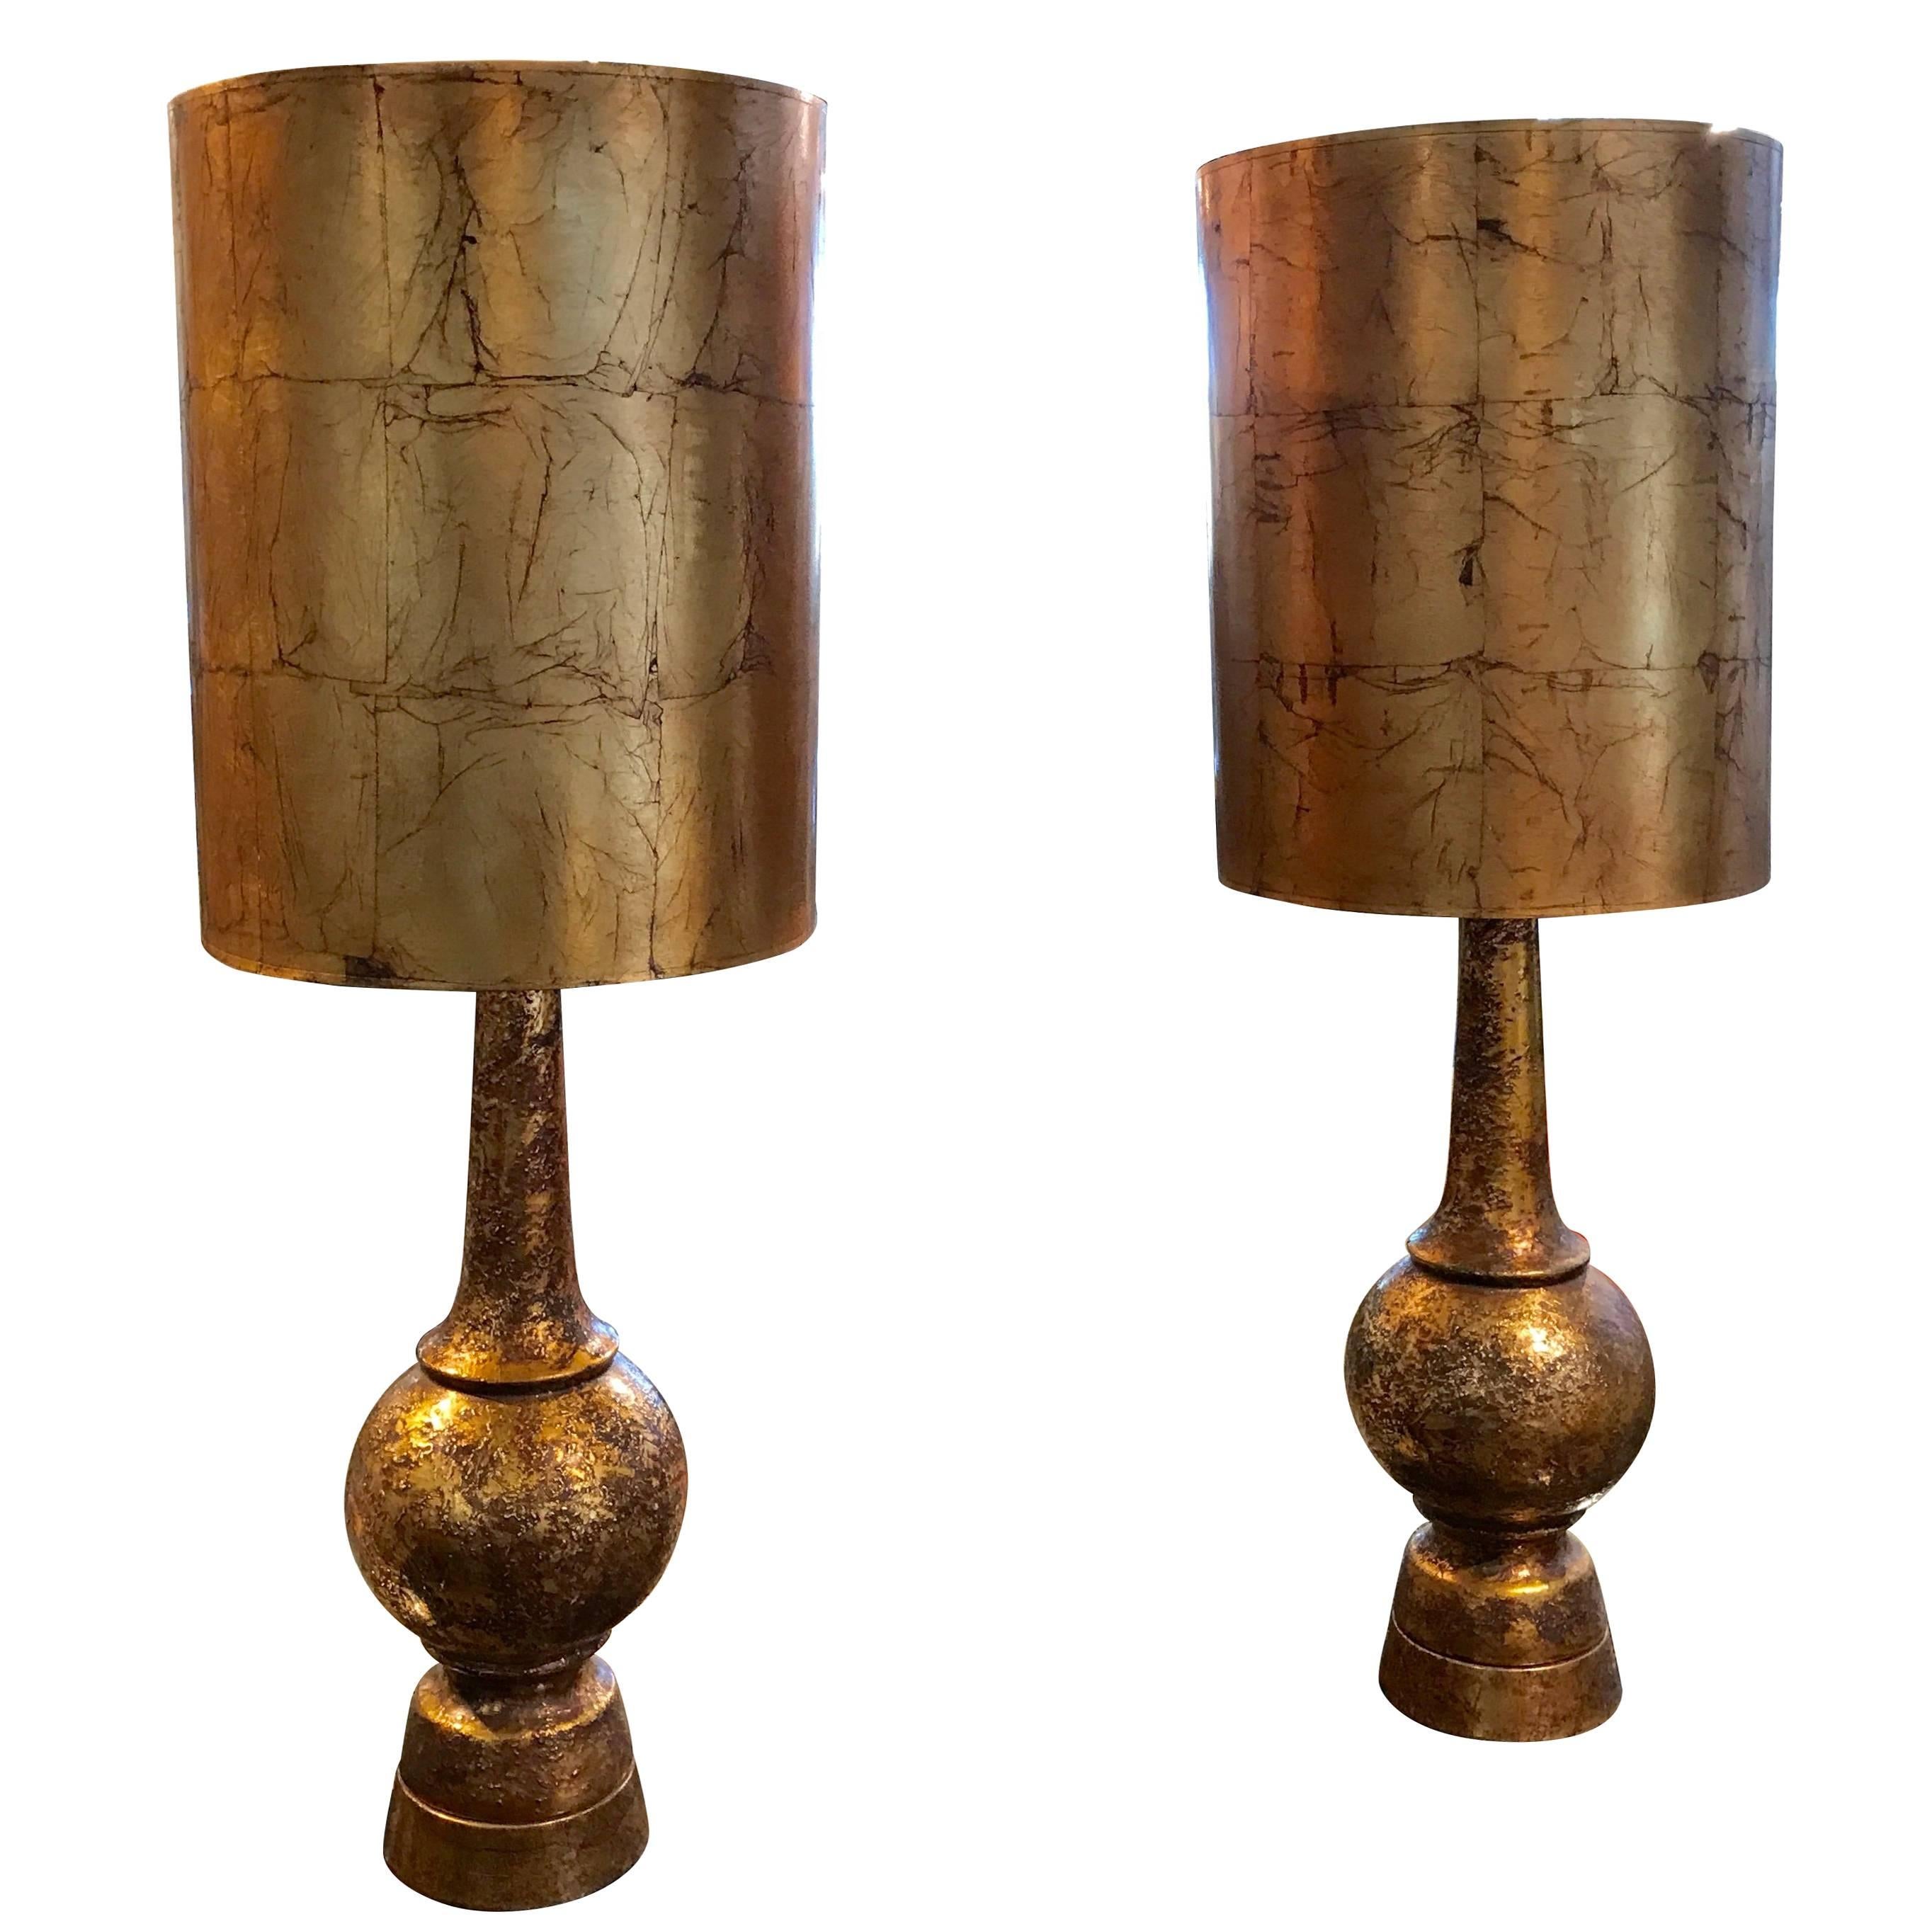 Pair of Nardini Brutalist brass patinated ceramic Lamps in Working Condition